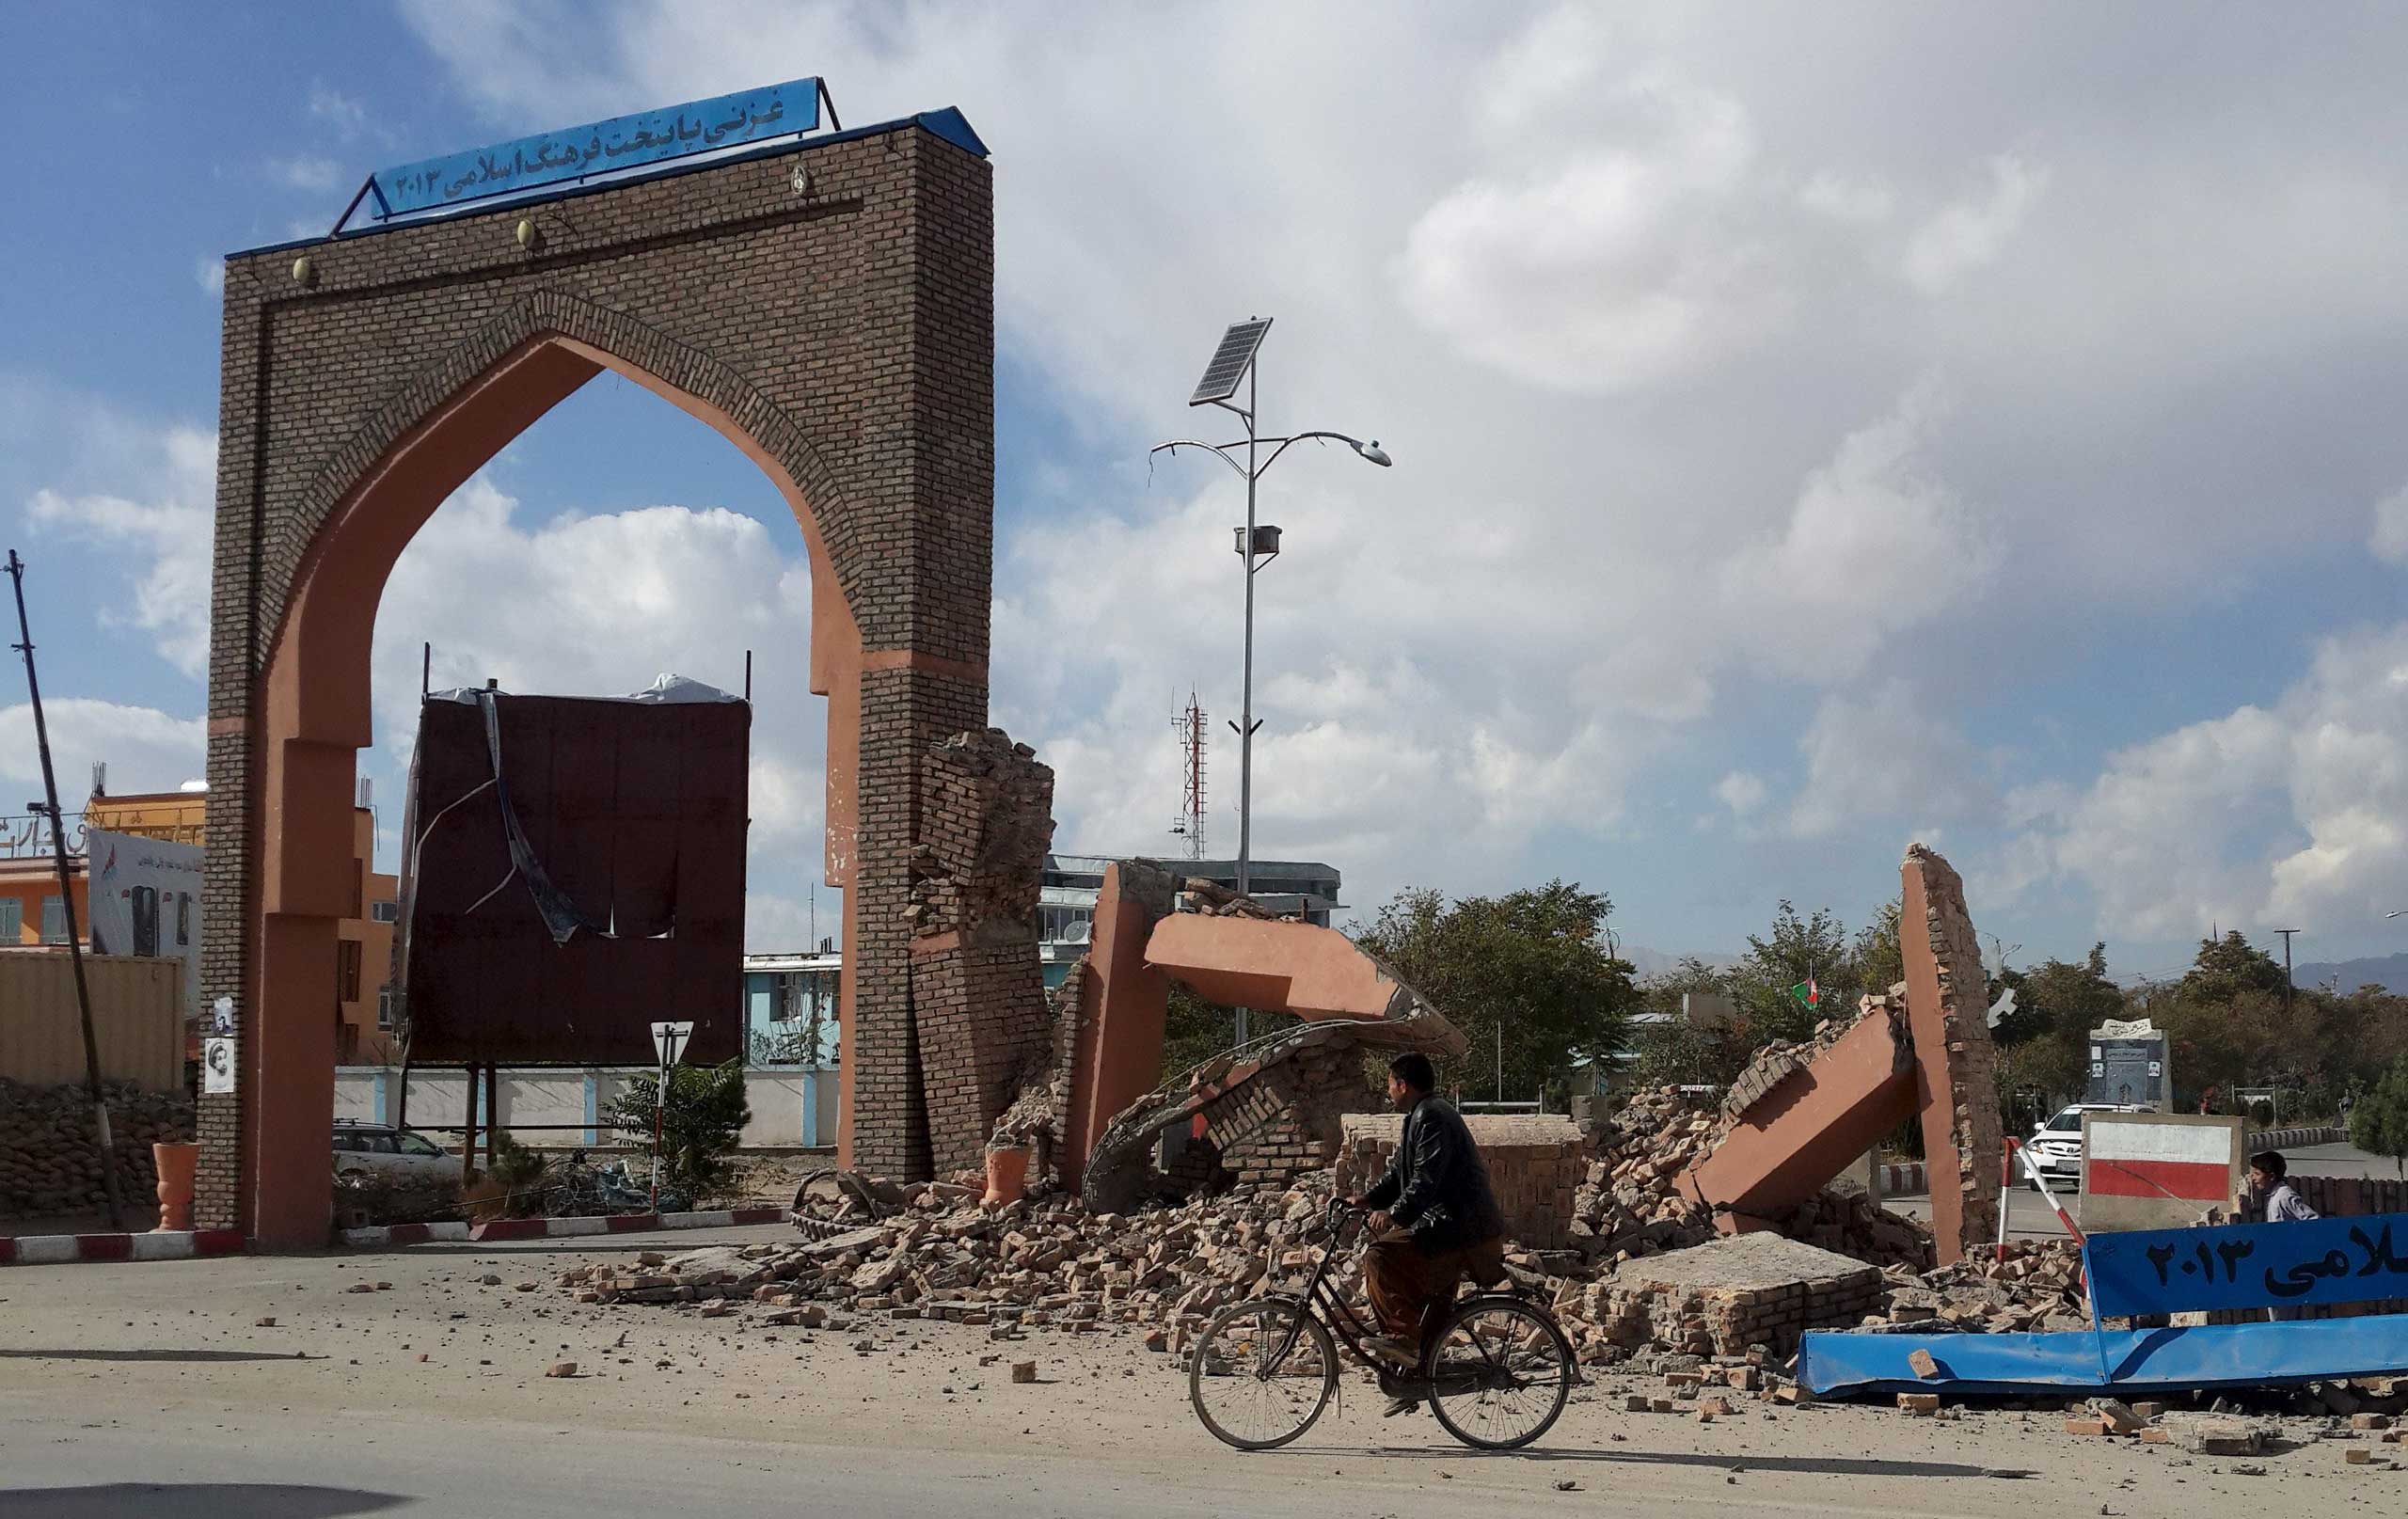 A man rides his bicycle next to damaged structures, after an earthquake in Ghazni, Afghanistan, on Oct. 26, 2015.